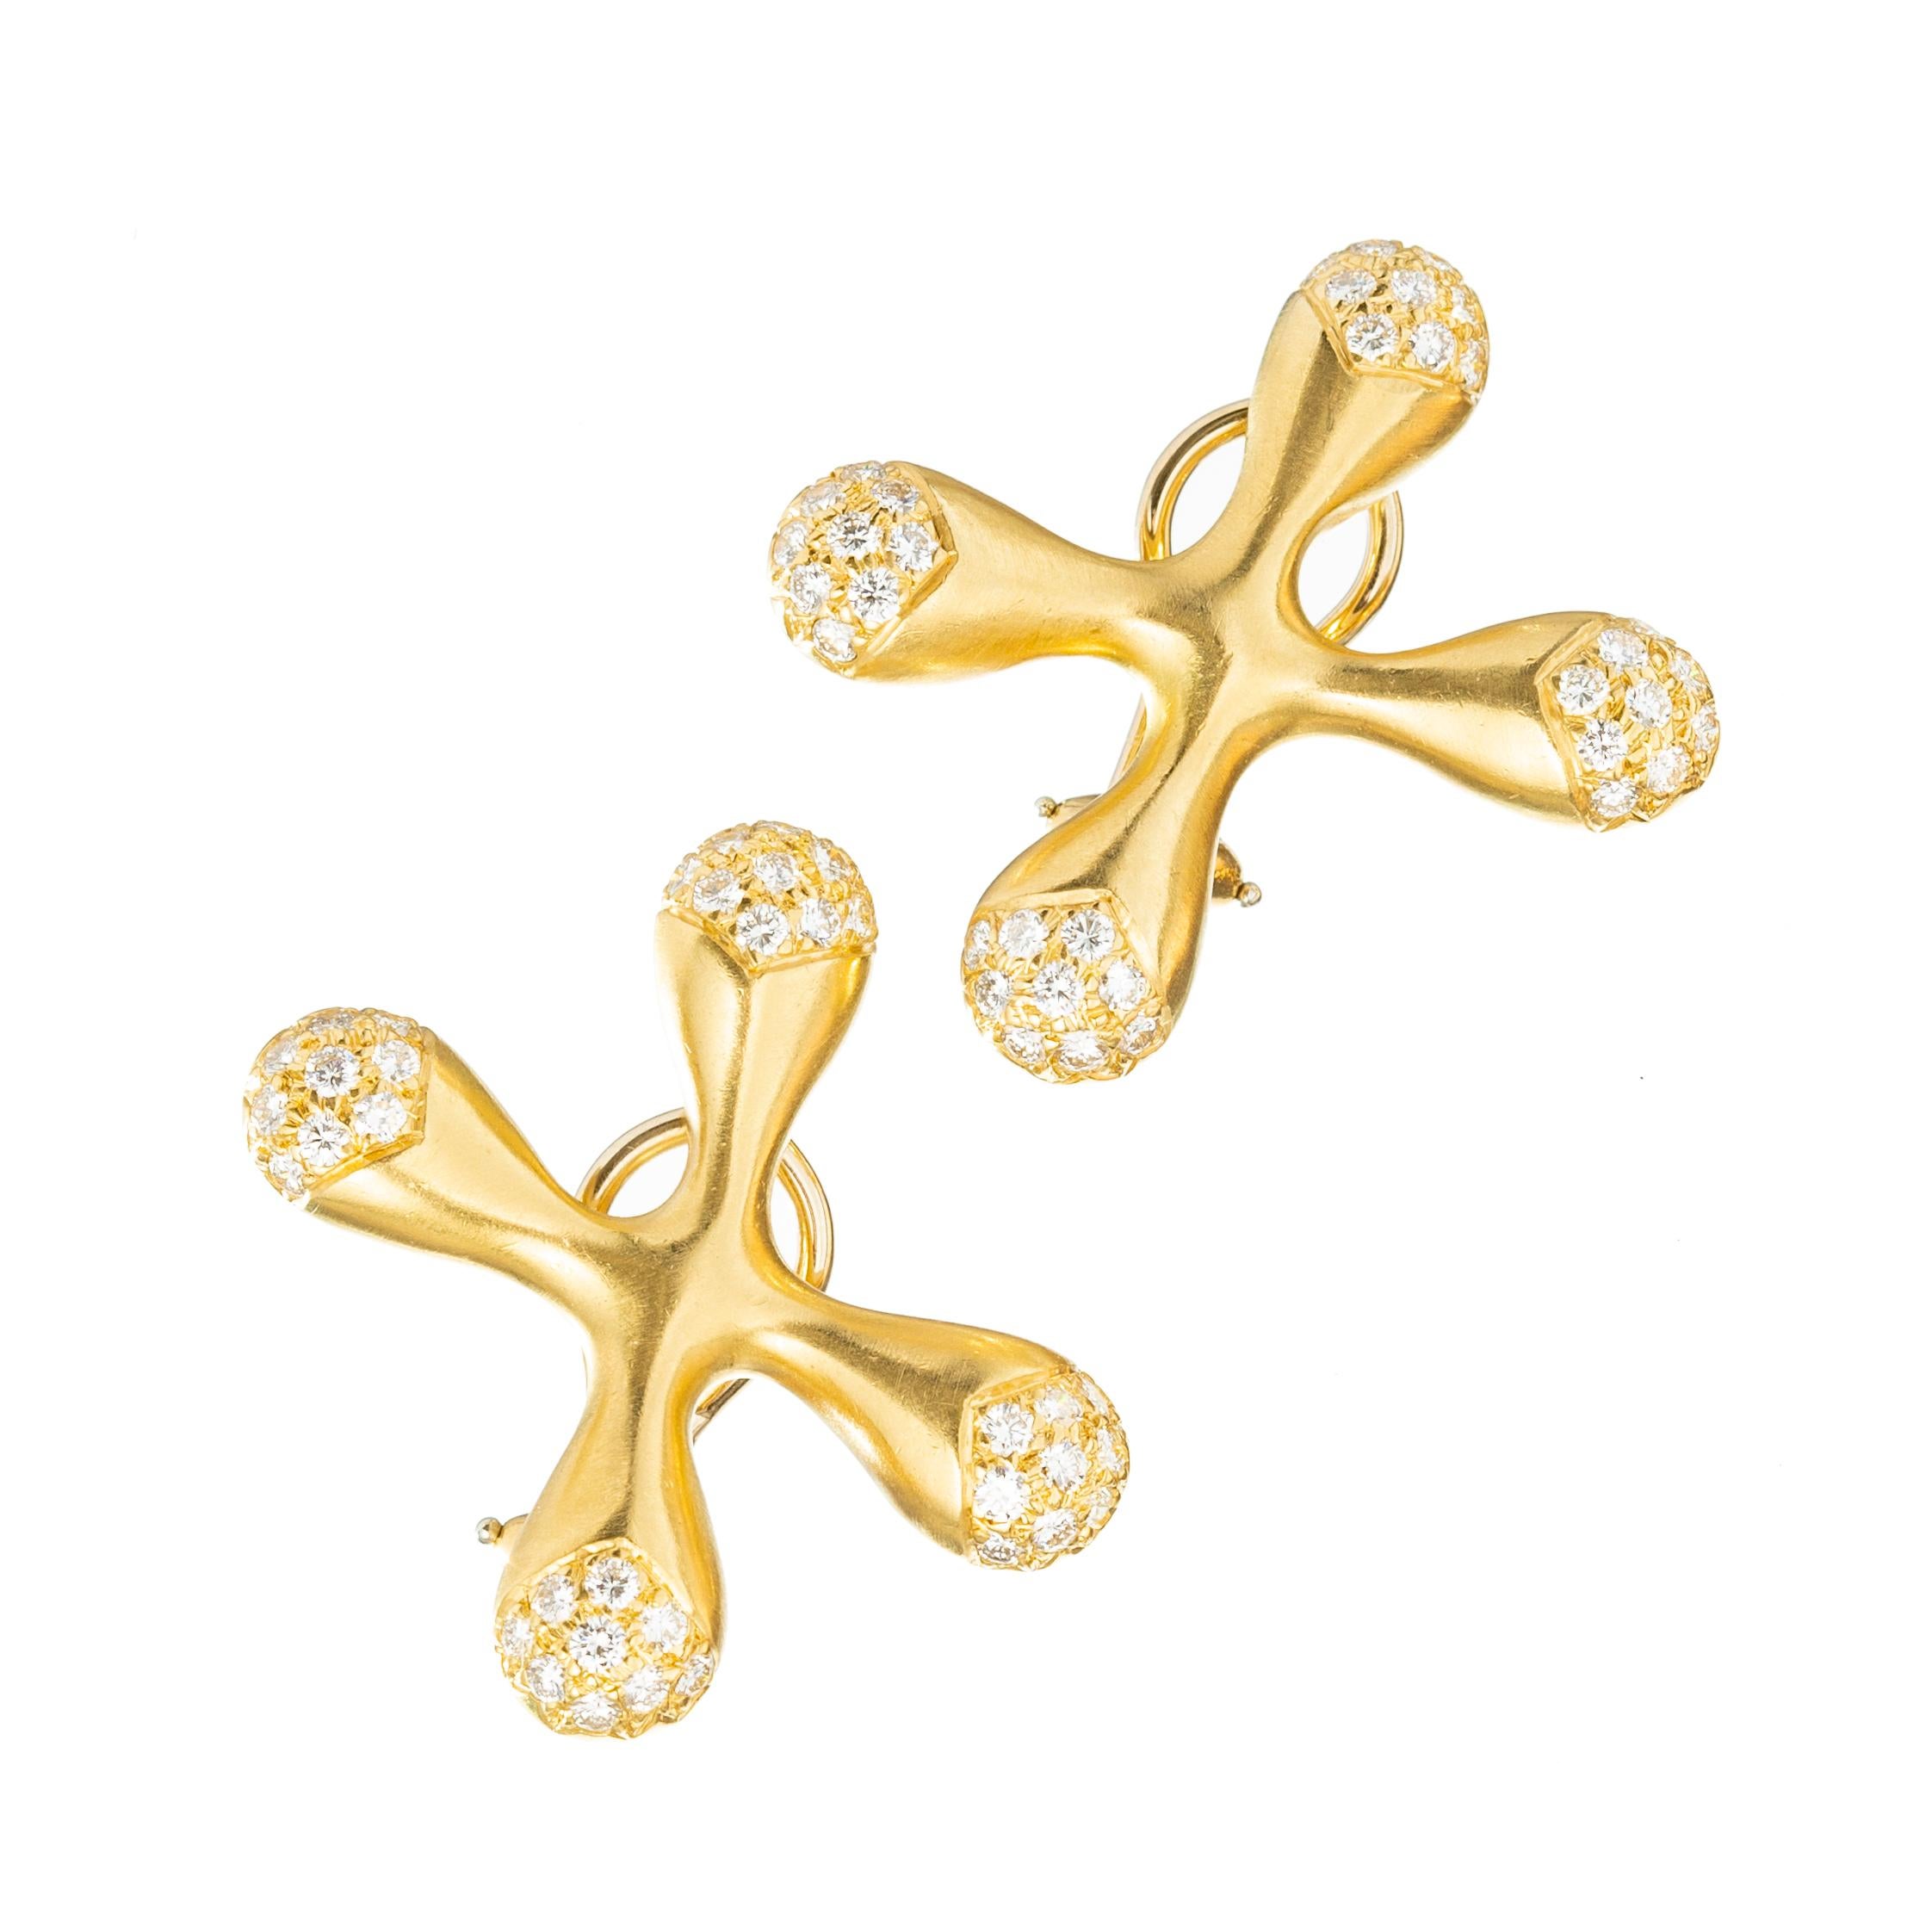 Angela Cummings 18k yellow gold and diamond accented 'X' design earrings. Matte finish with the tips accented by seventy-two round brilliant cut diamonds totaling 1.50 carats.  Pierced posts with omega style hinged clip backs.  Overall Length: 1.2